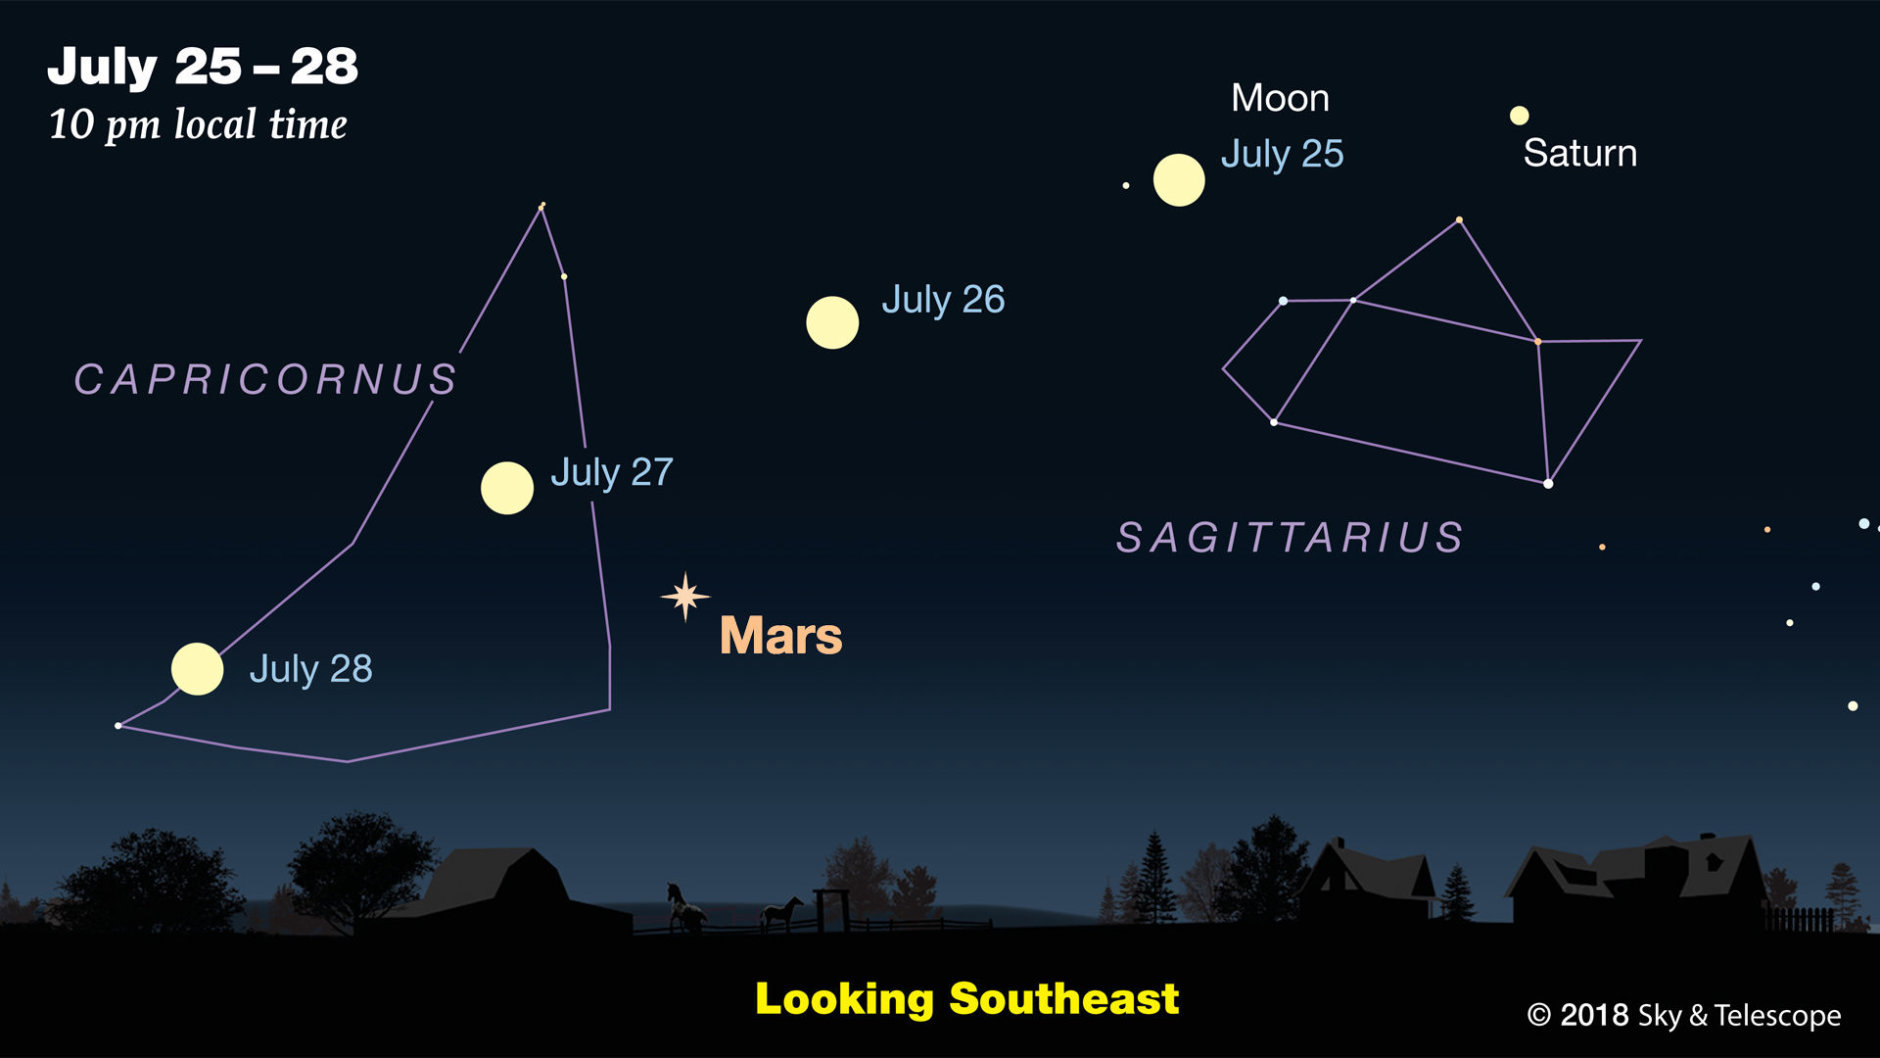 From SkyandTelescope.com: "Mars will be easy to spot low in the southeastern sky in late evening. On the night of the 27th, it will be joined by the full Moon." (Sky & Telescope / Gregg Dinderman)